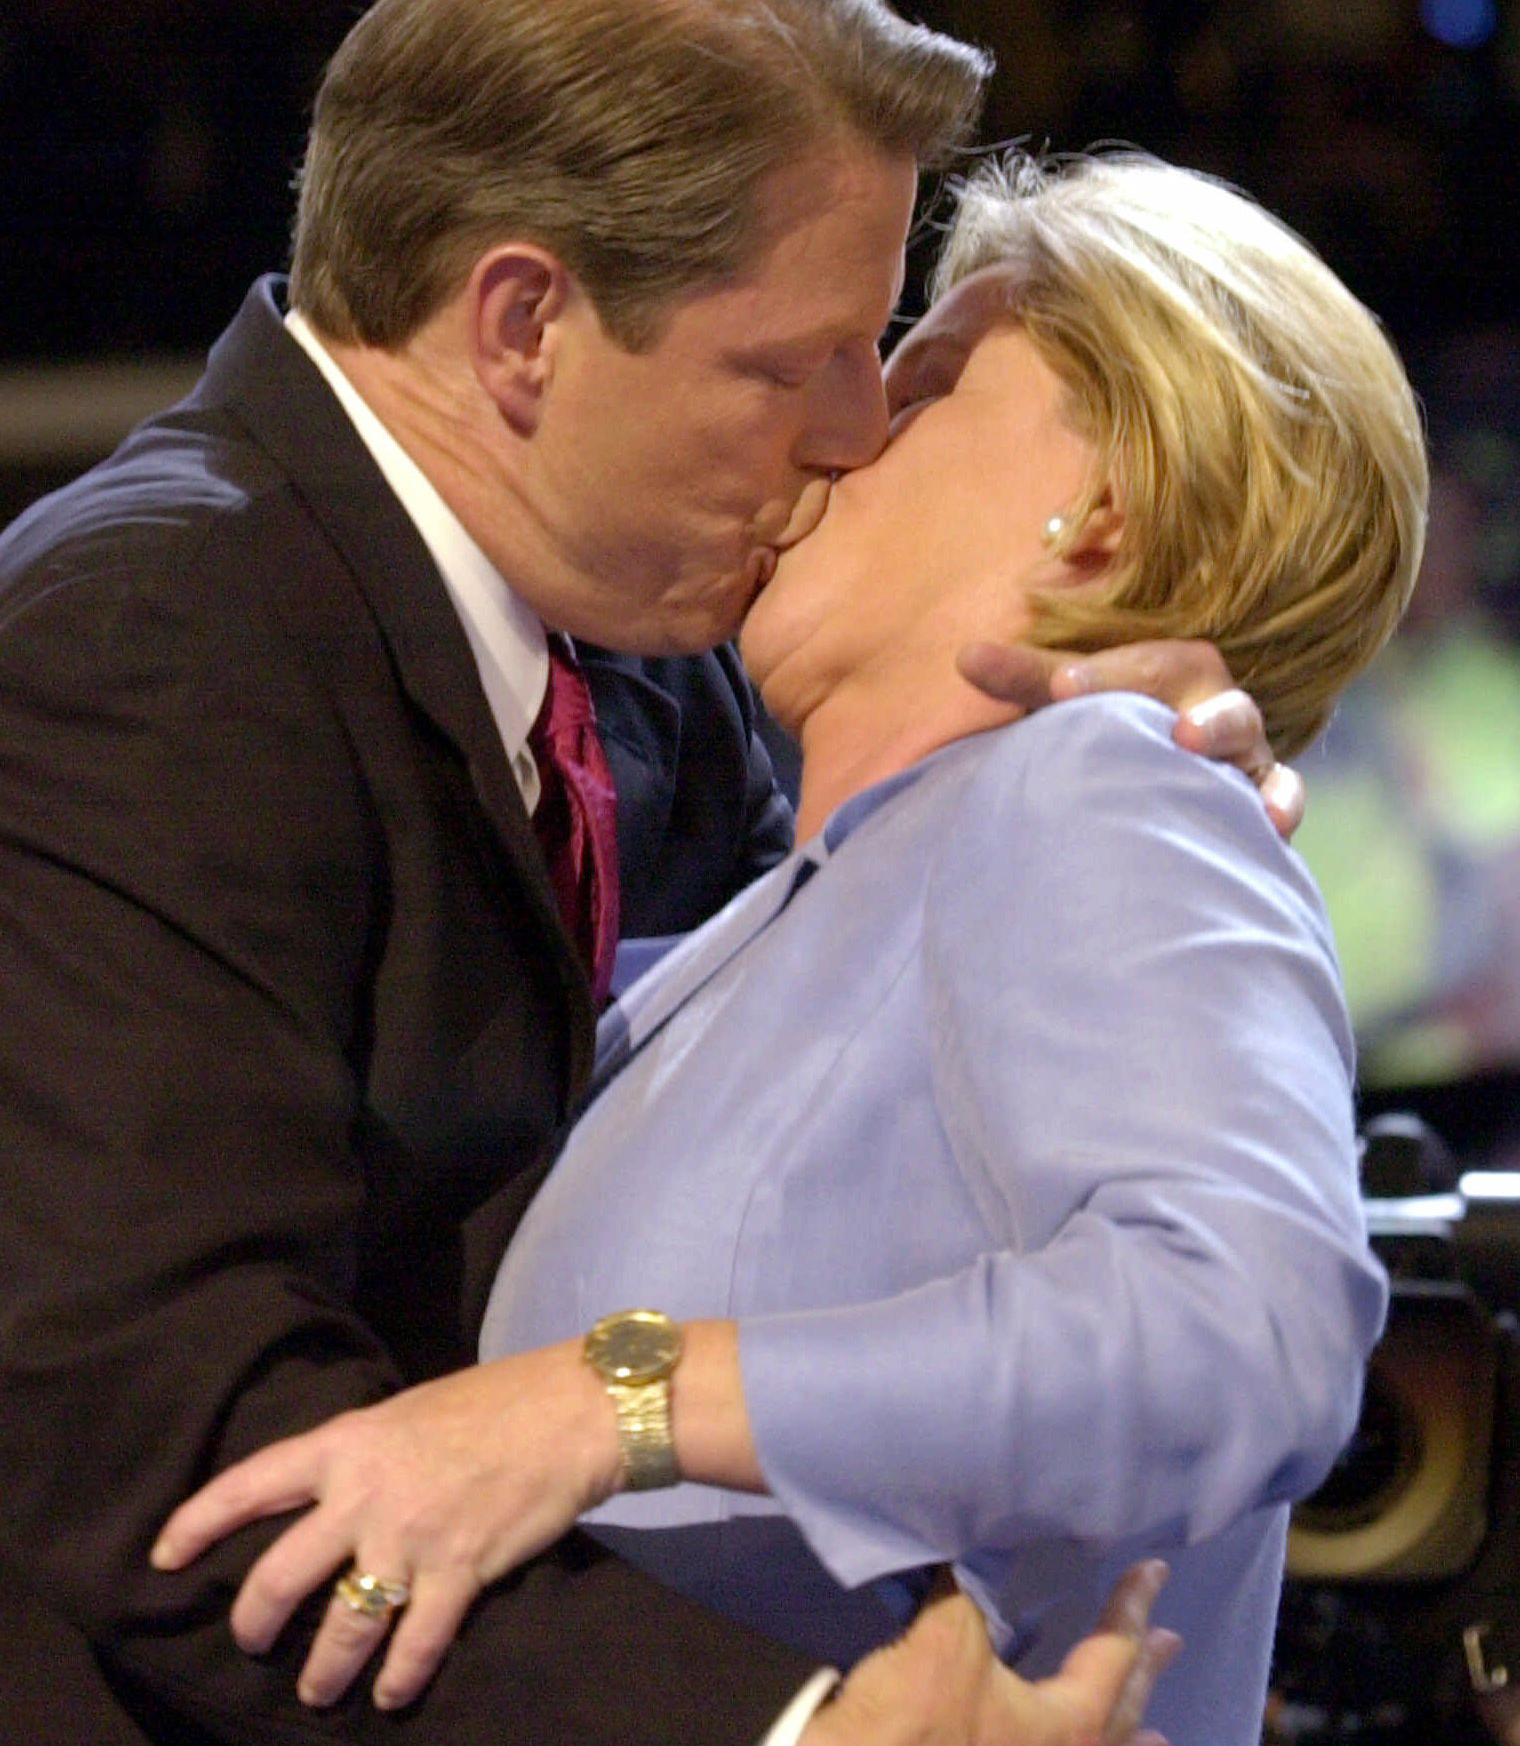 FILE - In this Aug. 17, 2000 file photo. then-Vice President Al Gore kisses his wife Tipper as he steps onto the stage at the Democratic National Convention in Los Angeles. Former Vice President Al Gore and his wife, Tipper, are separating after 40 years of marriage. (AP Photo/Stephen Savoia, File)